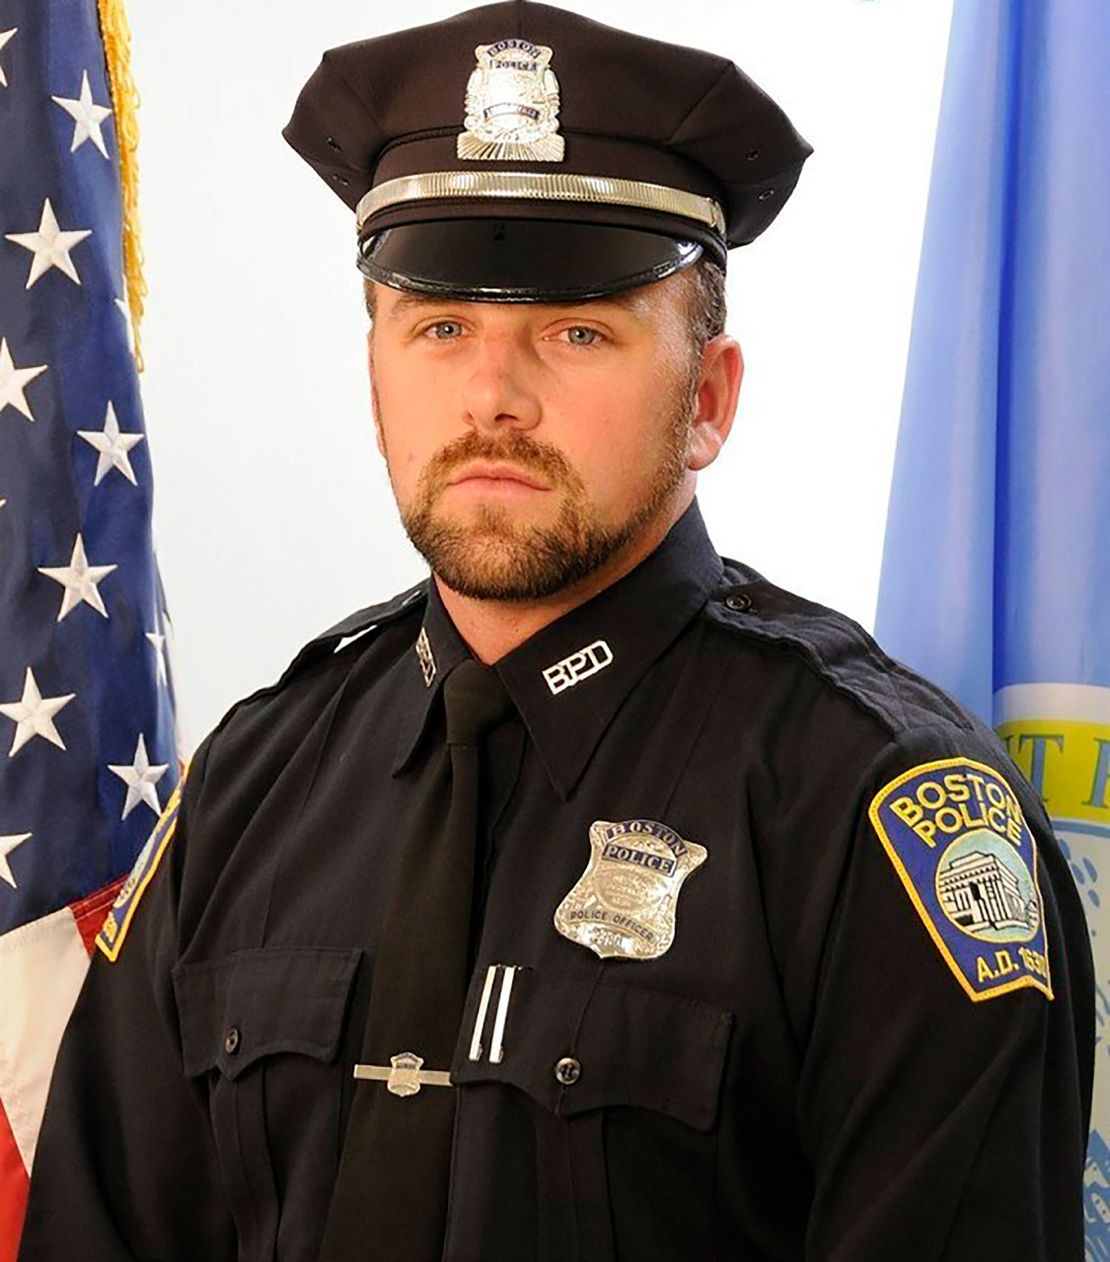 This undated photograph provided by the Boston Police Department shows officer John O'Keefe, 46, of Canton, Mass. O'Keefe died at an area hospital after being found lying in snow unresponsive outside his home on Saturday Jan. 30, 2022. Karen Read, 41, of Mansfield, Mass., was charged with manslaughter on Wednesday Feb. 2, 2022 after allegedly striking O'Keefe, her boyfriend, with her car. Read pleaded not guilty to manslaughter and other charges at her arraignment Wednesday. (Boston Police Department via AP)